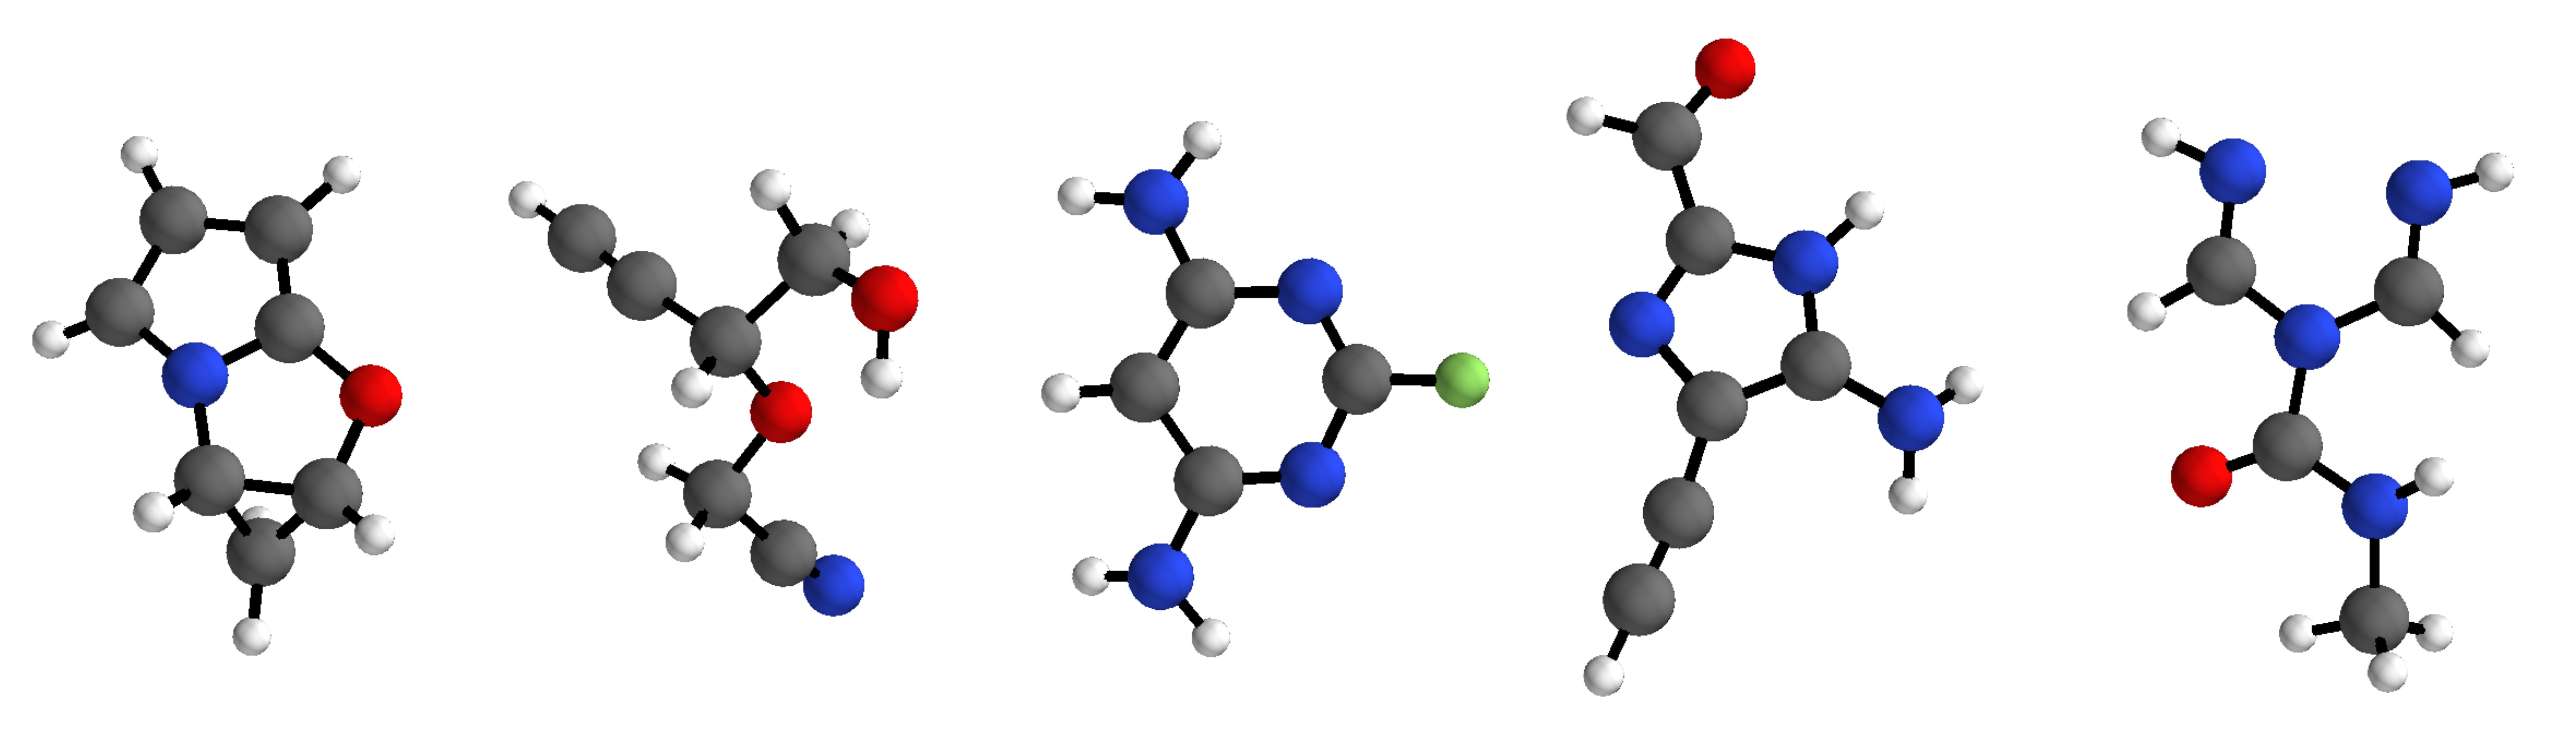 example_molecules_1.png